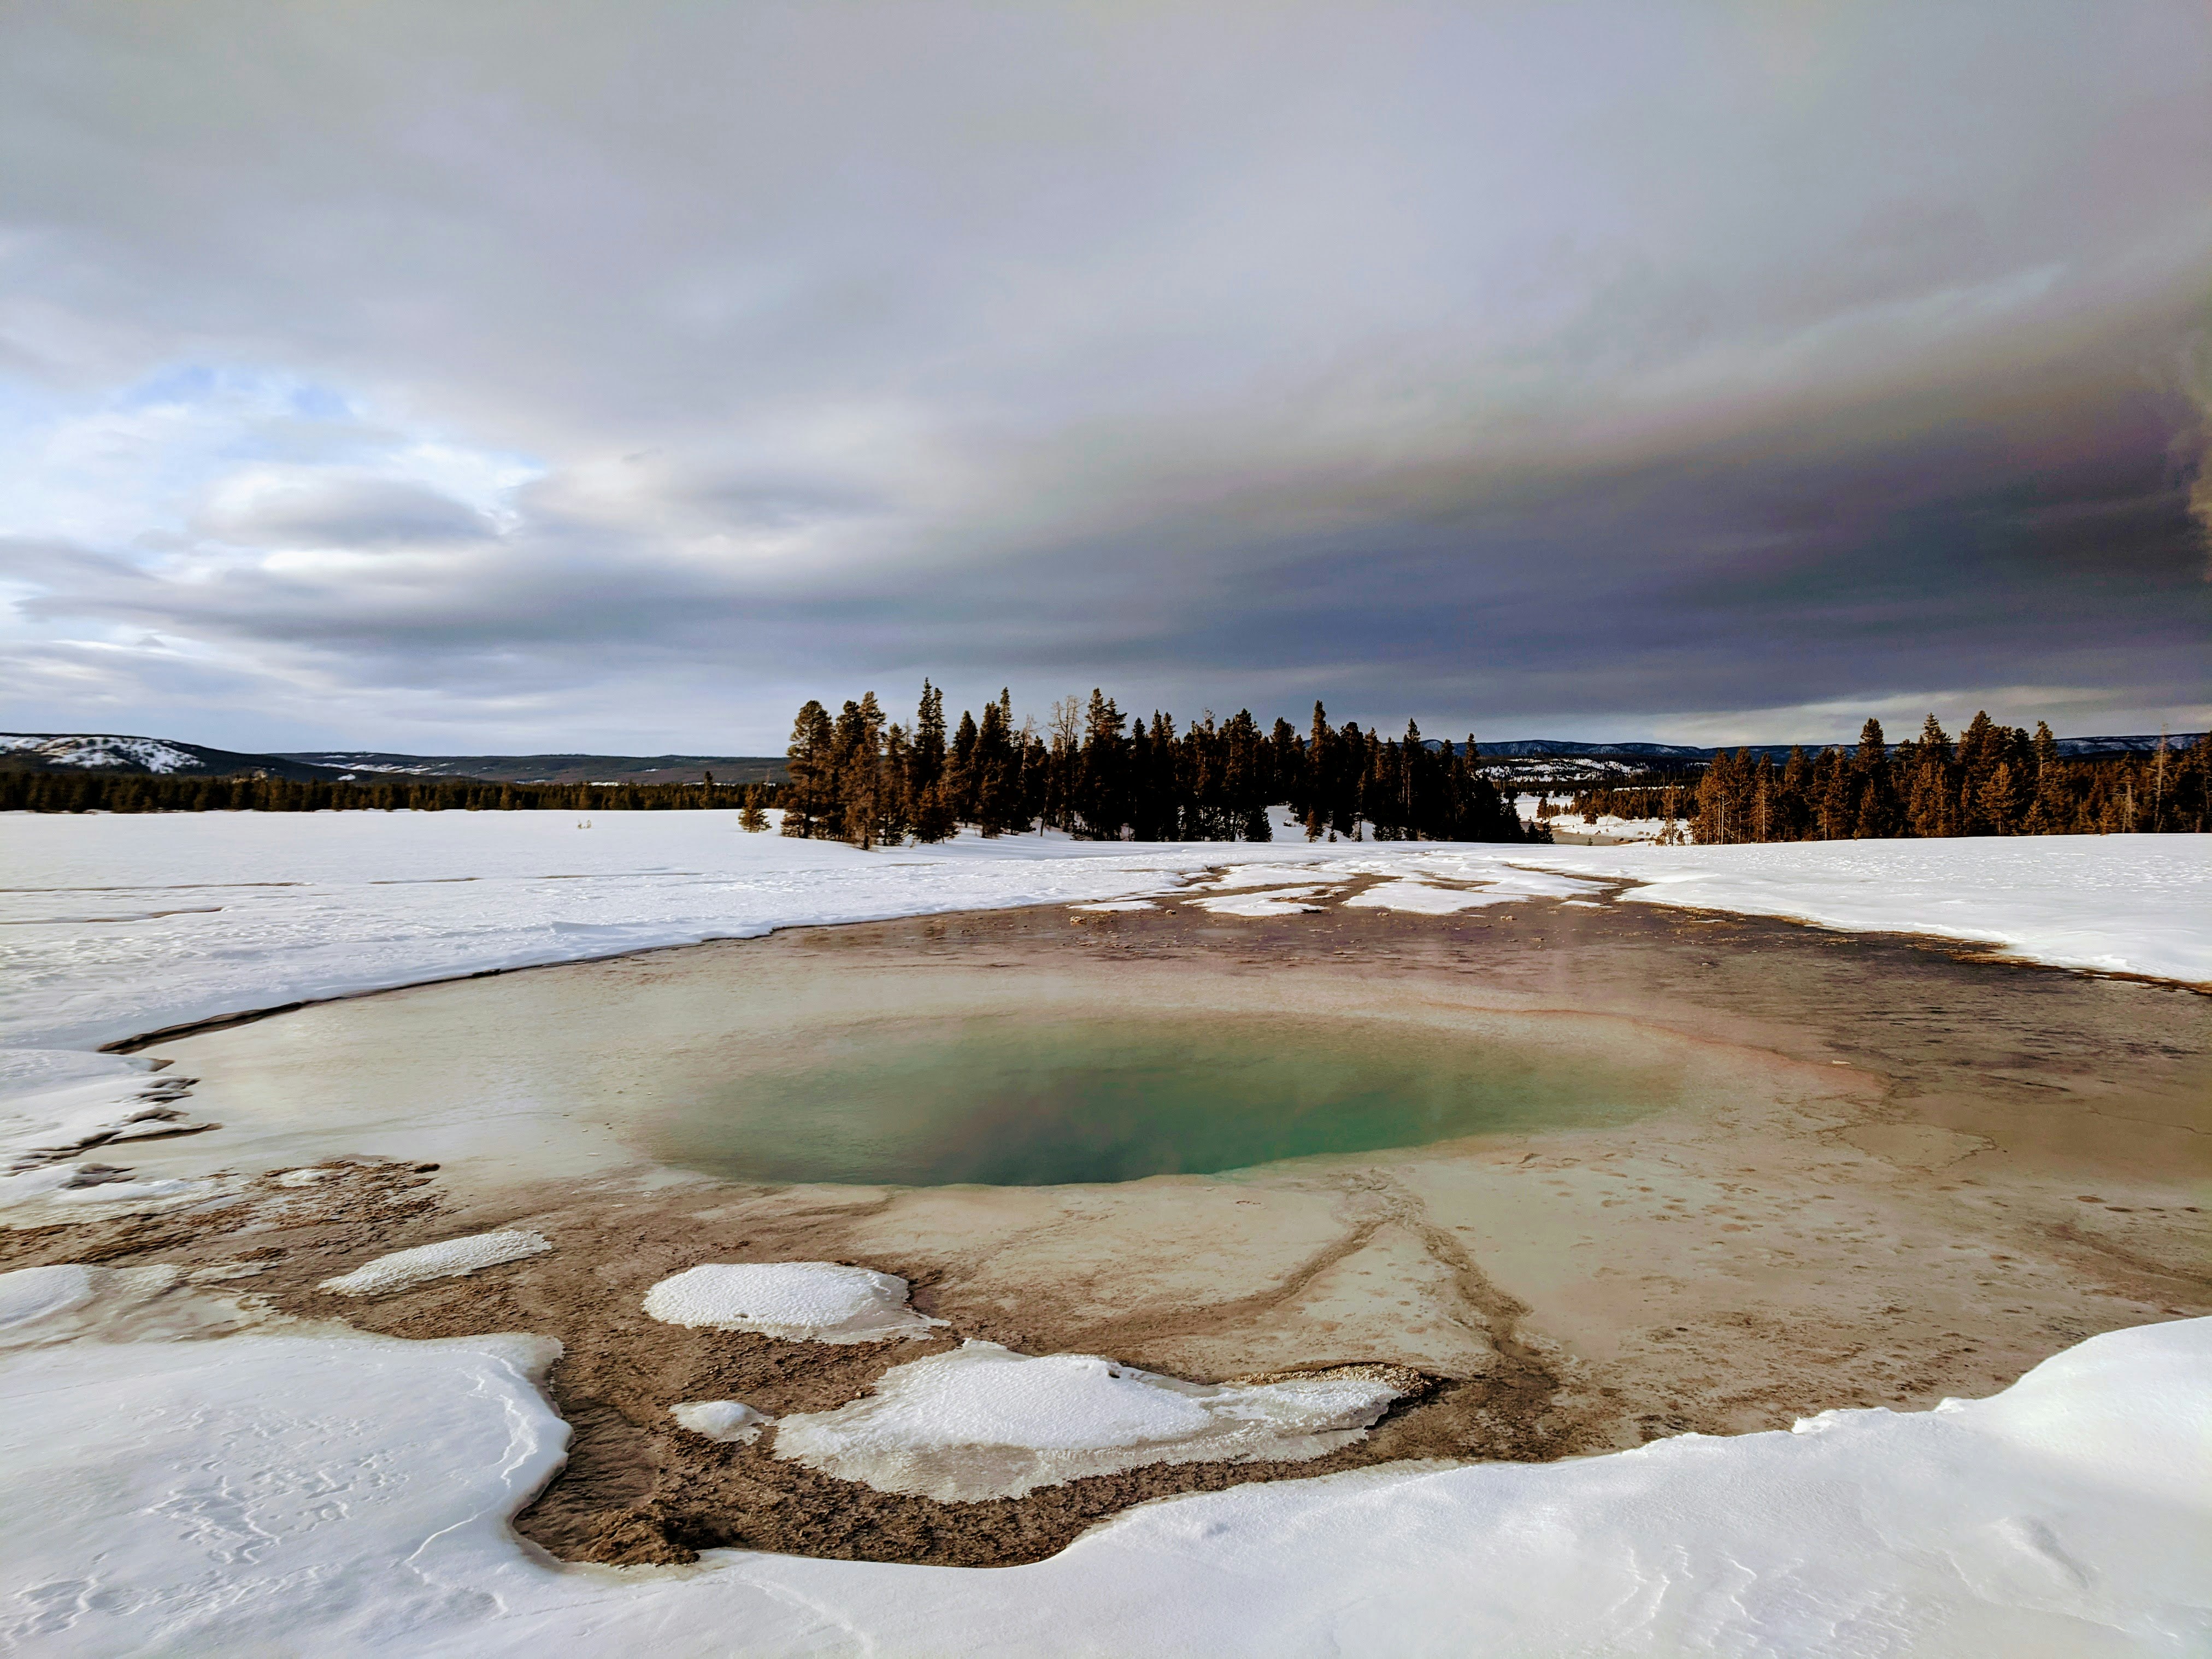 Turquoise Pool in Yellowstone National Park surrounded by a contrasting blanket of fresh white snow